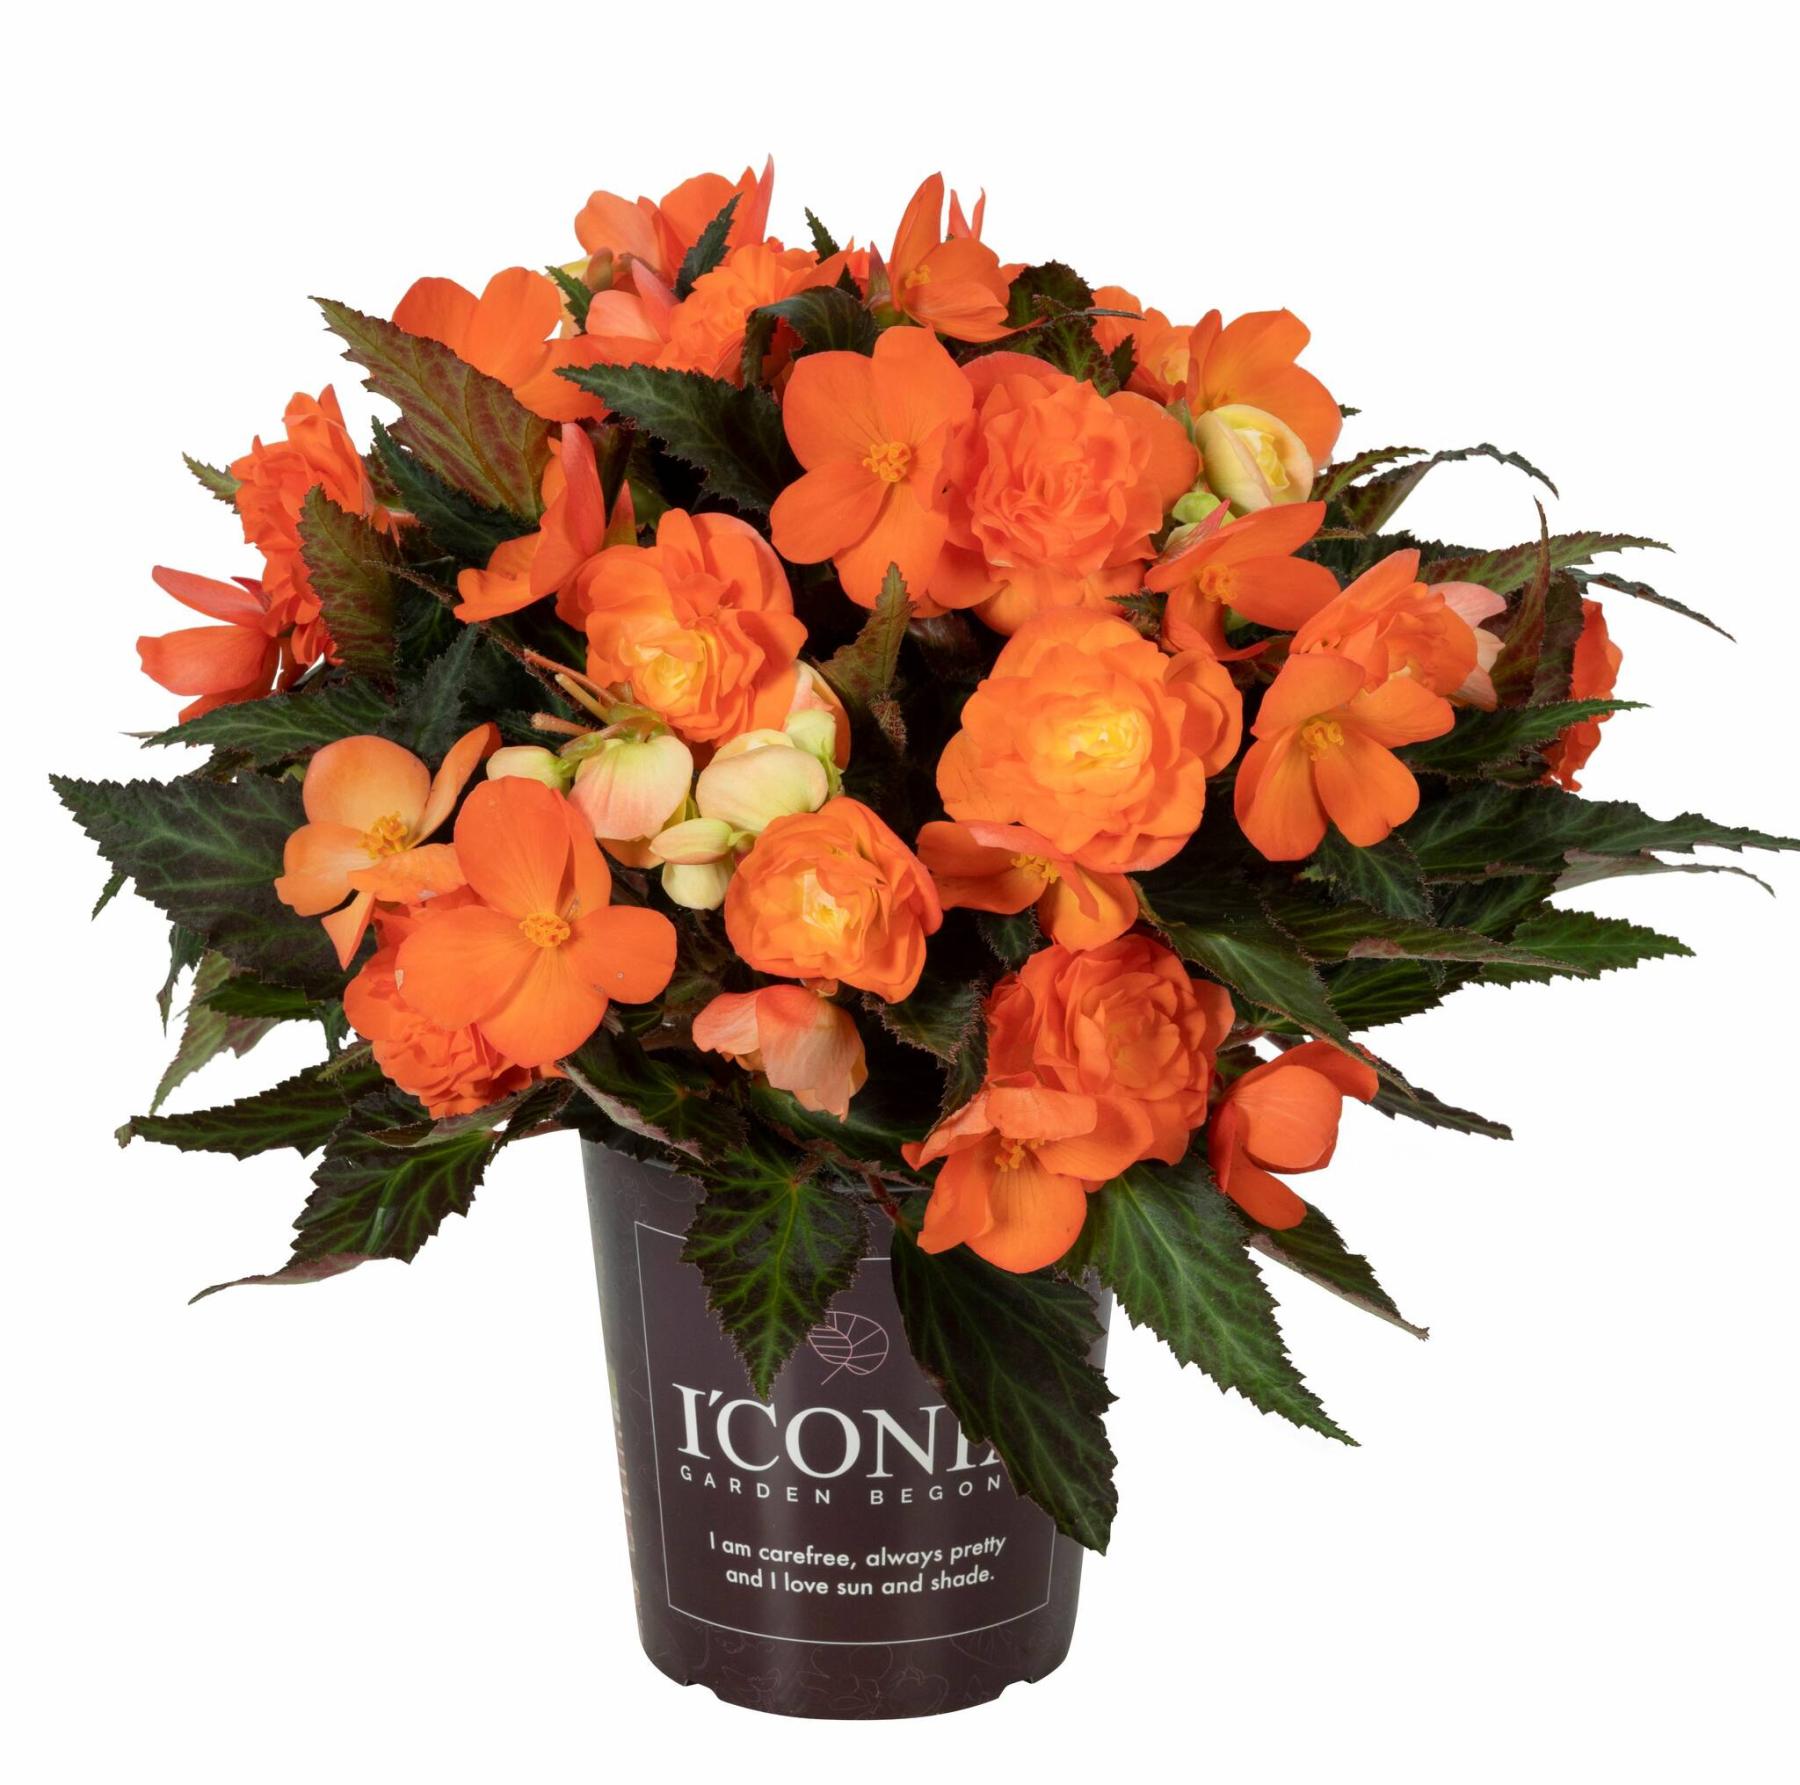  <p>Dummen Orange</p>
                                <p>Not one, but six new I&rsquo;Conia Begonia varieties are launching this spring. Shown: I&rsquo;Conia First Kiss Saffron.</p> 